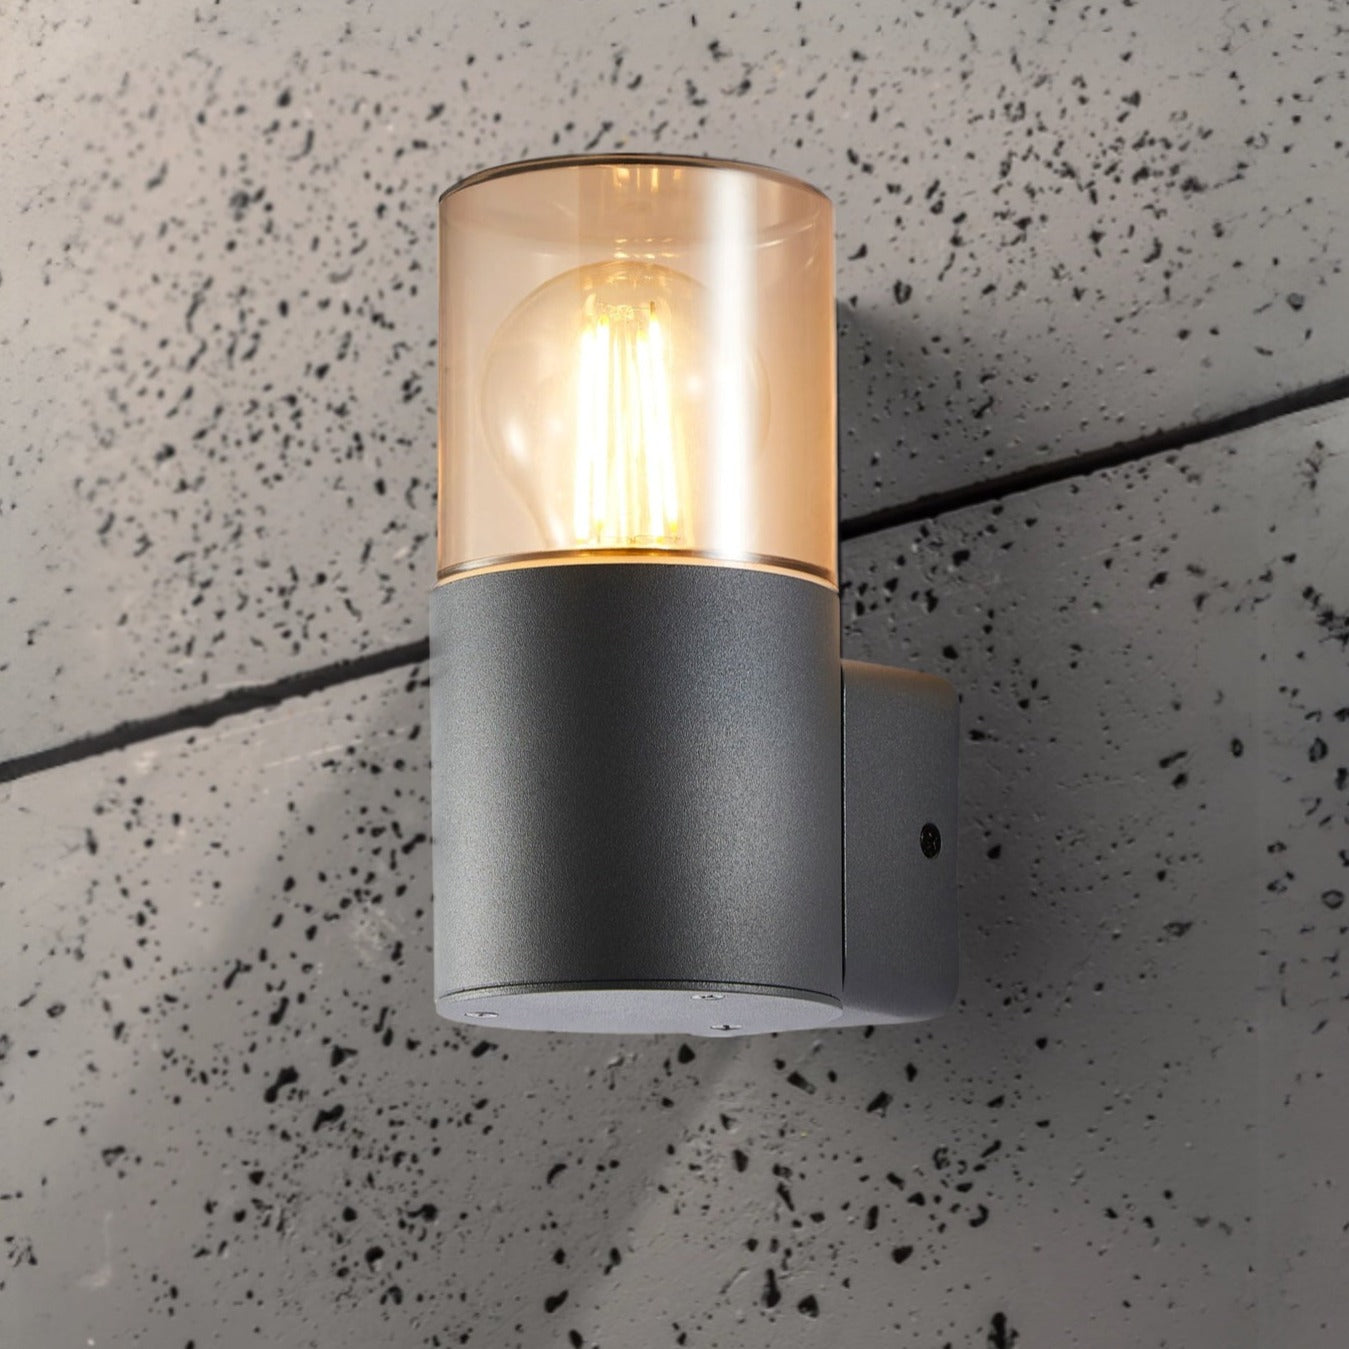 Our Levi grey anthracite outdoor wall light with smoked diffuser would look perfect in a modern or more traditional home design. Outside wall lights can provide atmospheric light in your garden, at the front door or on the terrace as well as a great security solution. It is designed for durability and longevity with its robust material producing a fully weatherproof and water resistant light fitting.